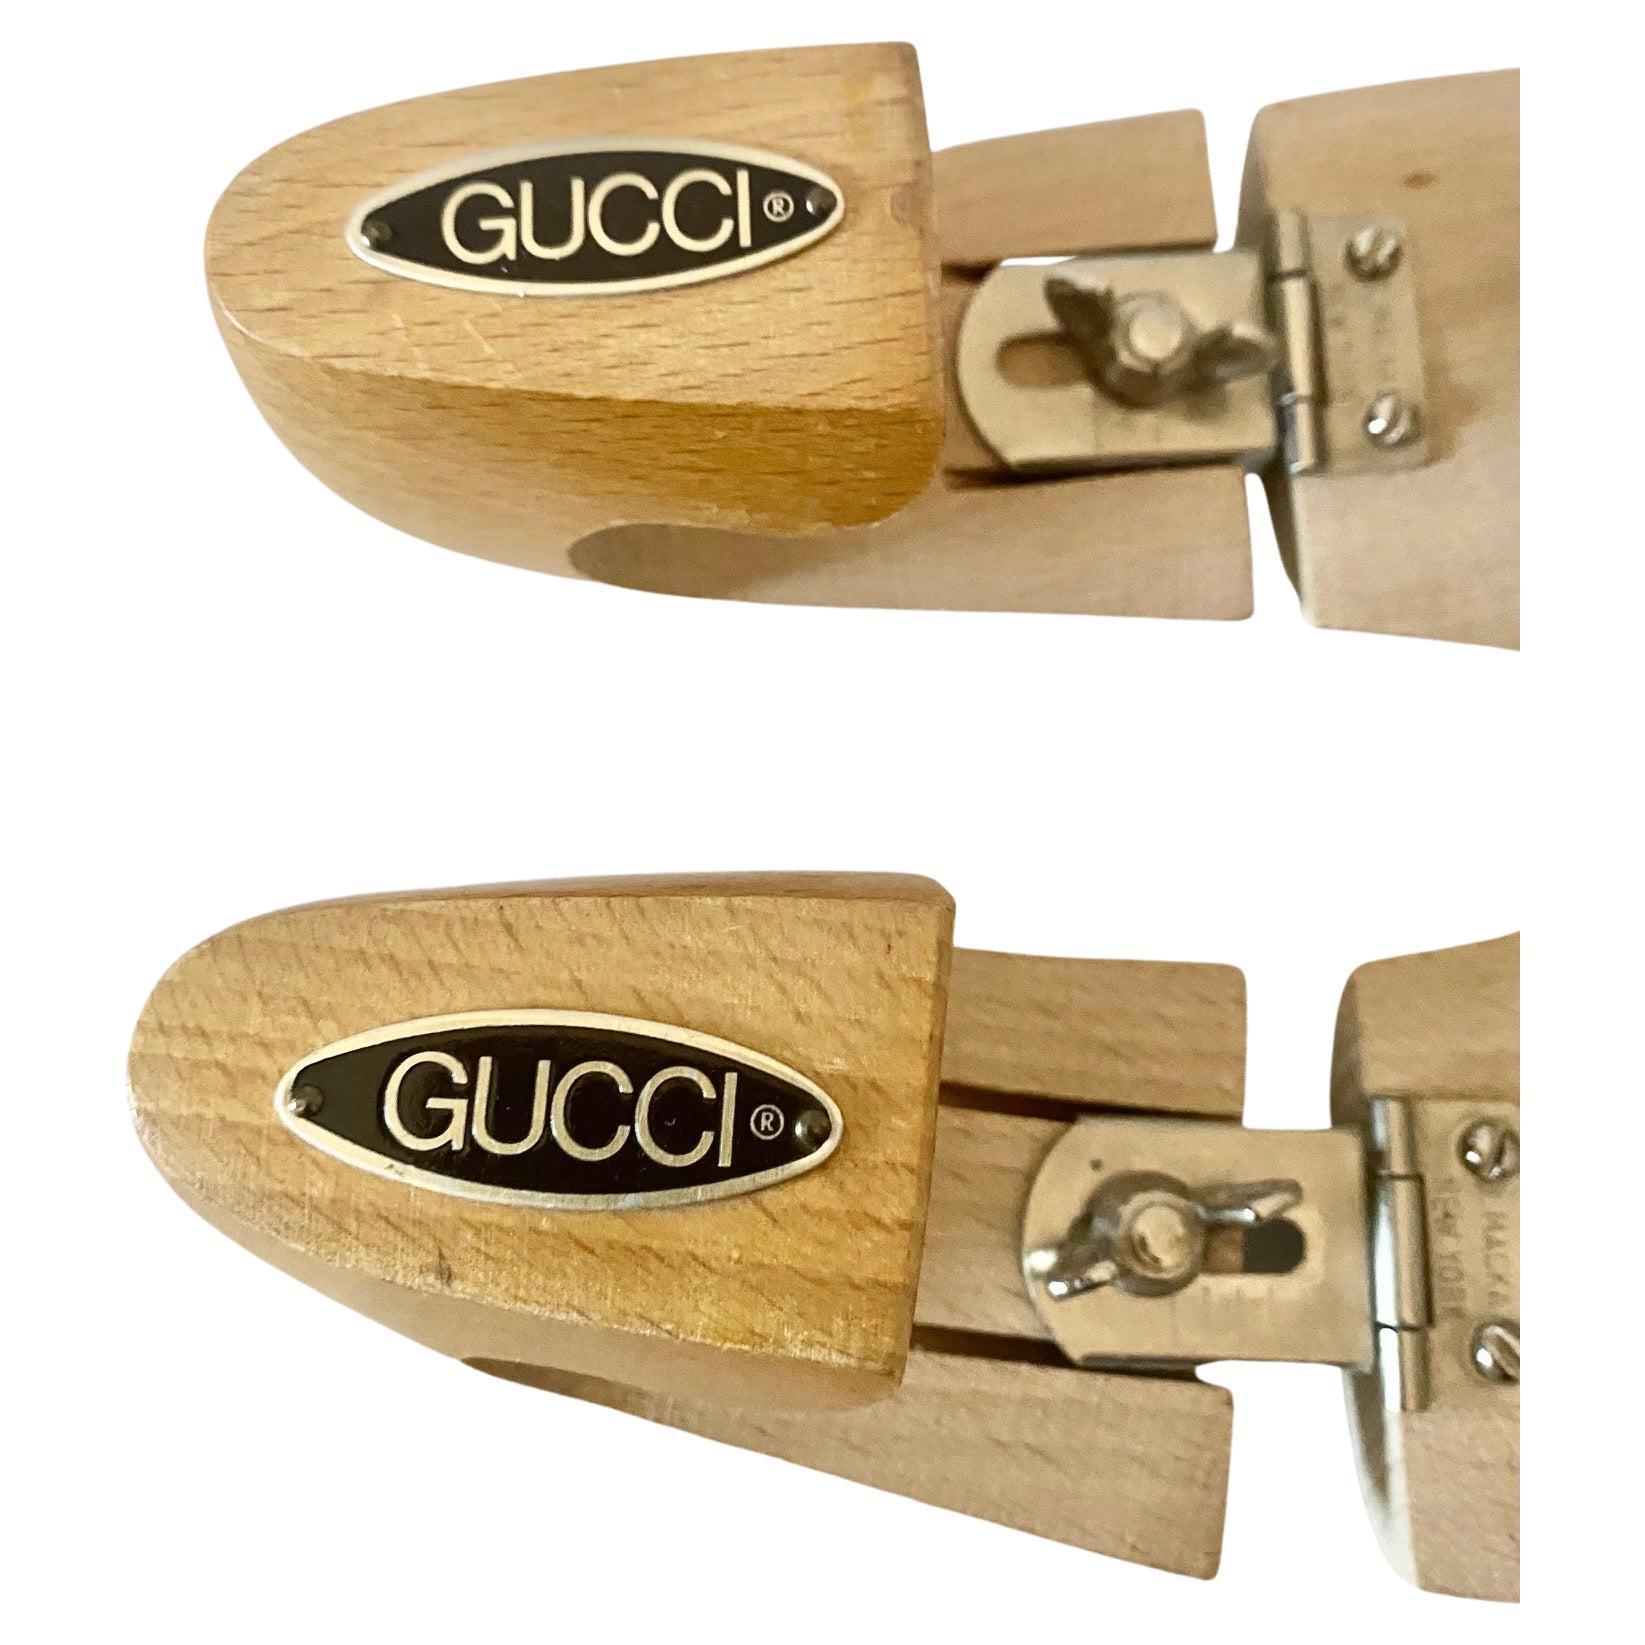 1960s Gucci Wooden Shoe Trees In Good Condition For Sale In London, GB